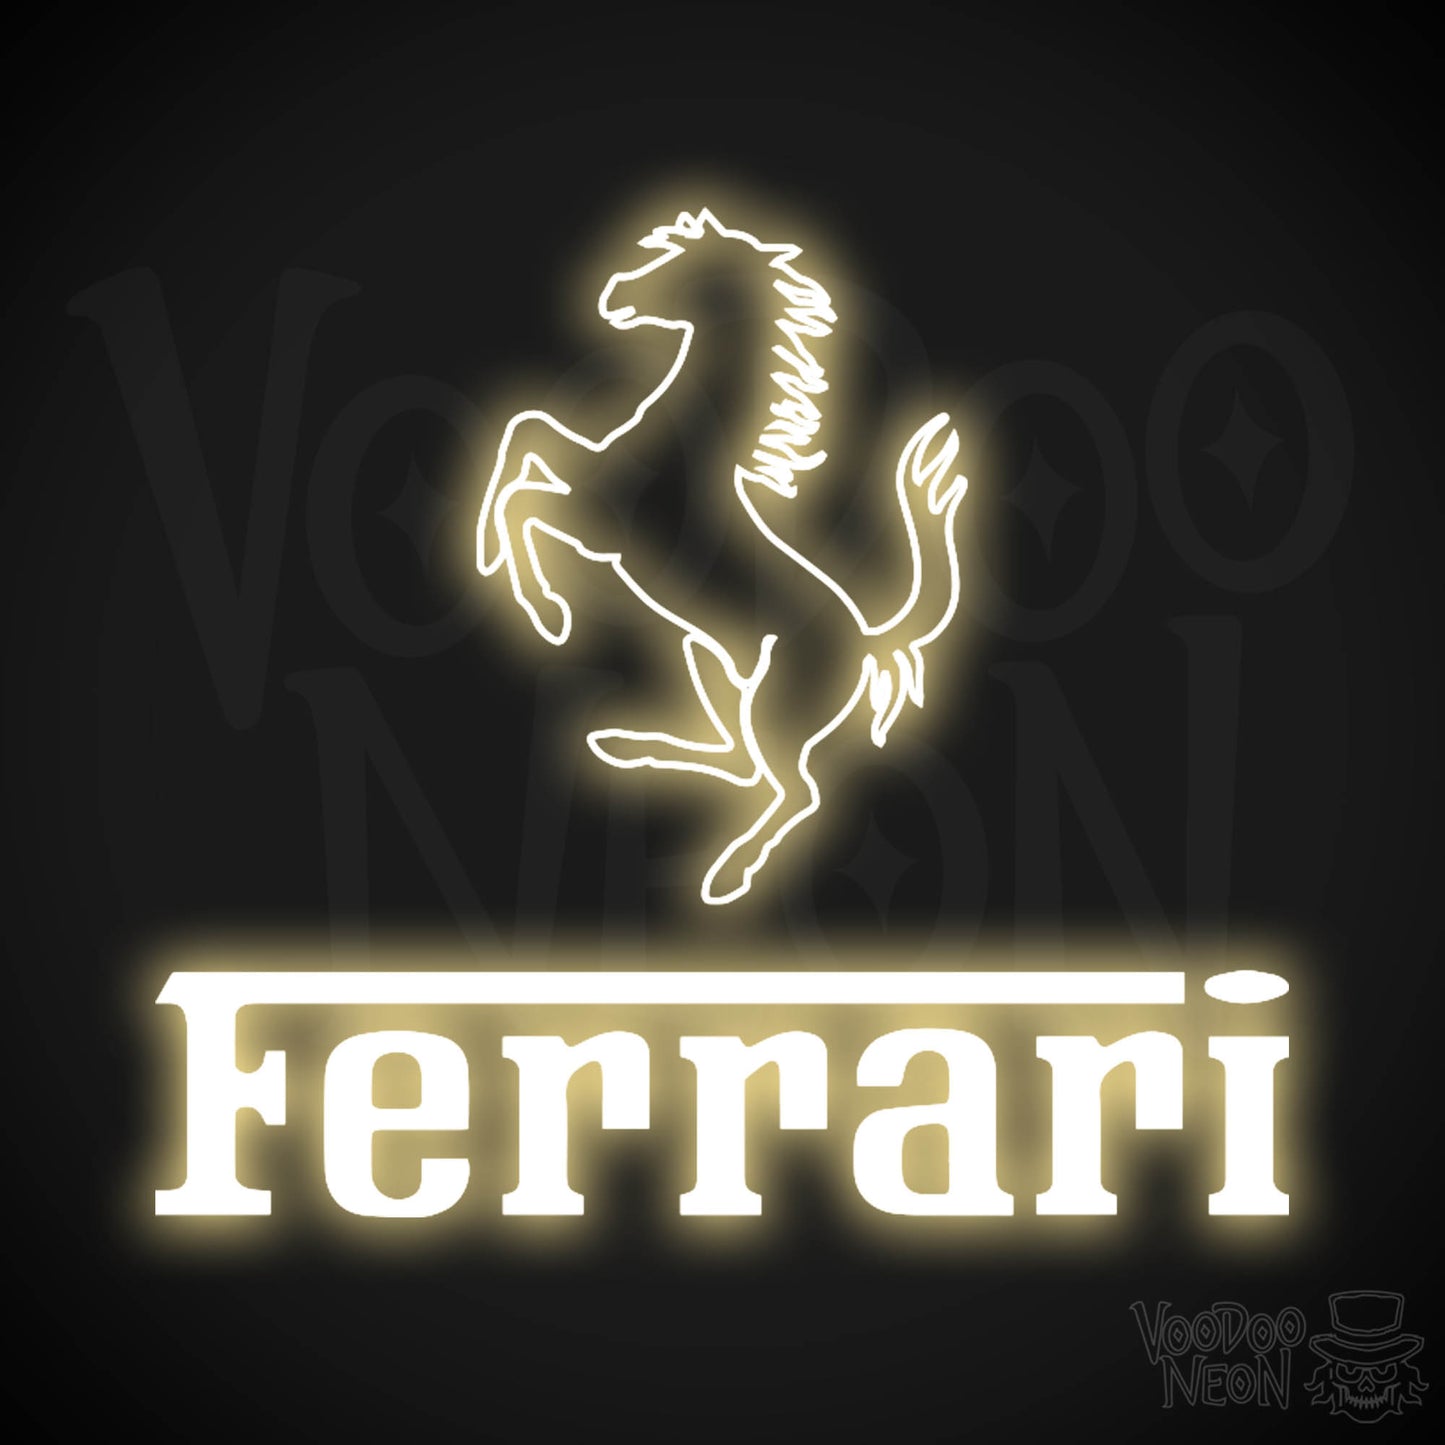 Ferrari Neon Sign - Neon Ferrari Sign - Ferrari Logo Wall Art - Color Warm White